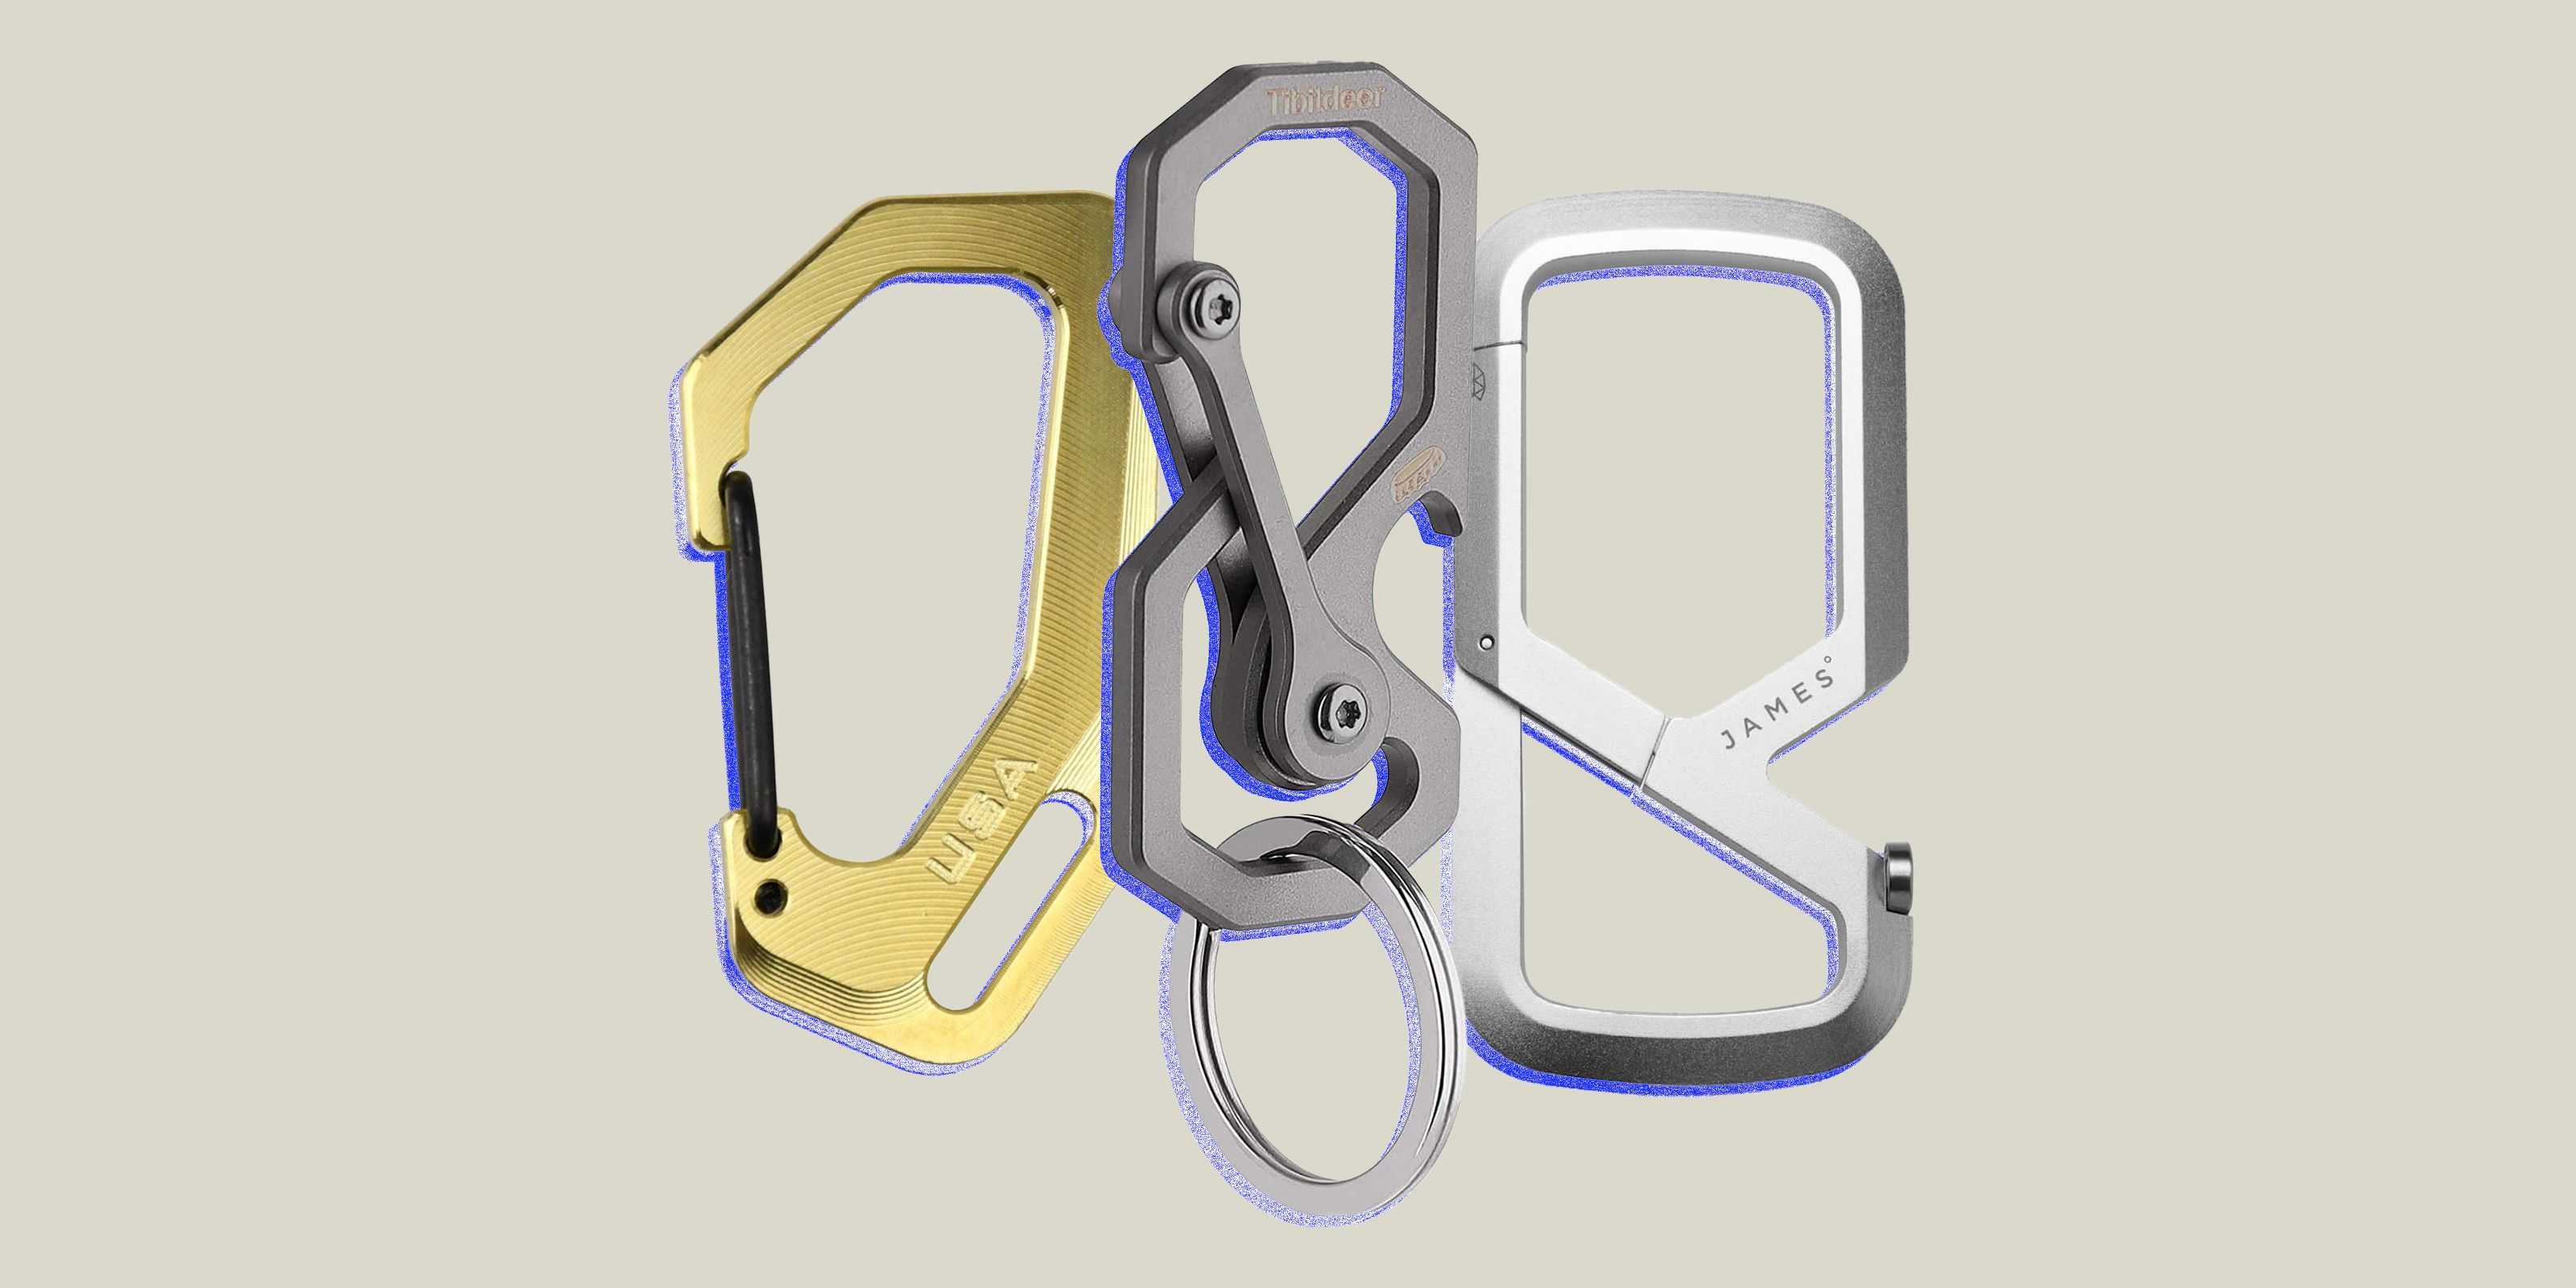 11 of the Best Carabiner Keychains to Upgrade Your EDC